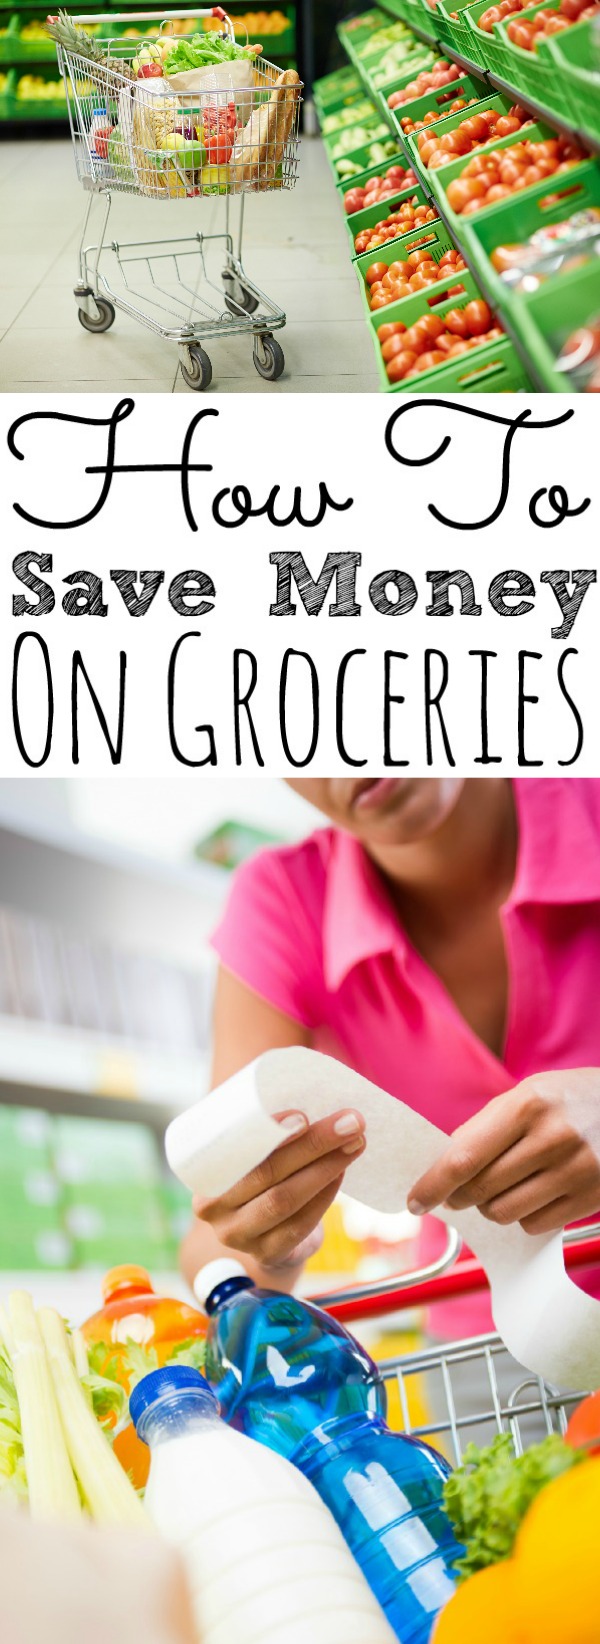 How To Save Money At The Grocery Store